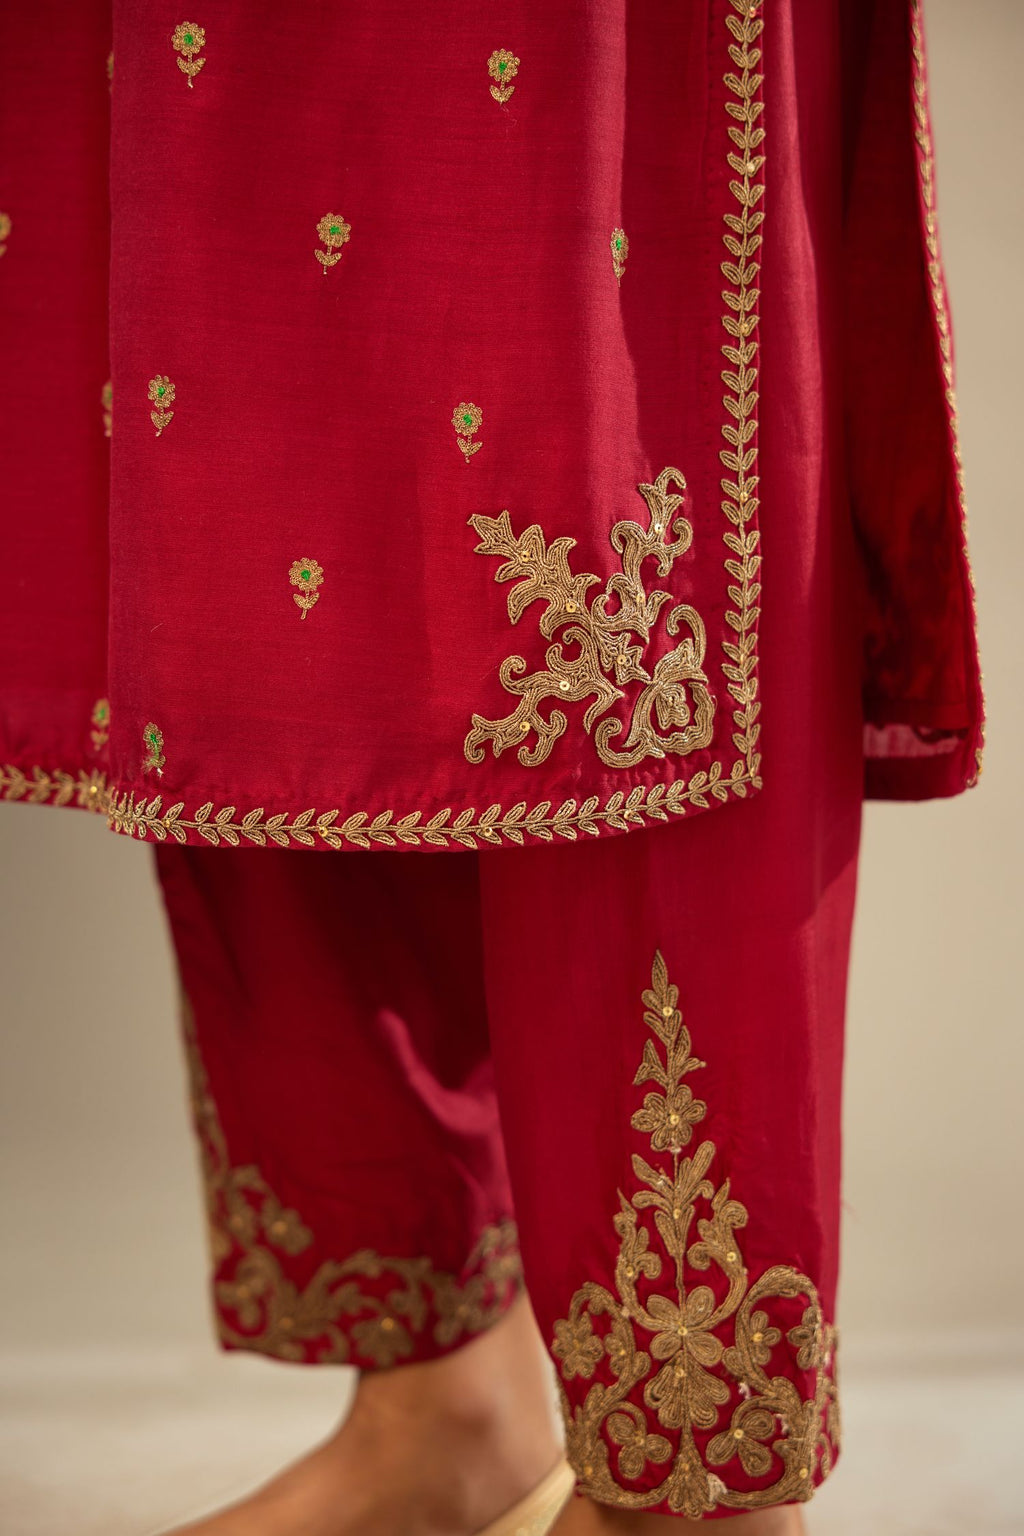 Fuchsia silk chanderi straight kurta set with gold dori embroidery, detailed with small aari embroidery buties all-over.